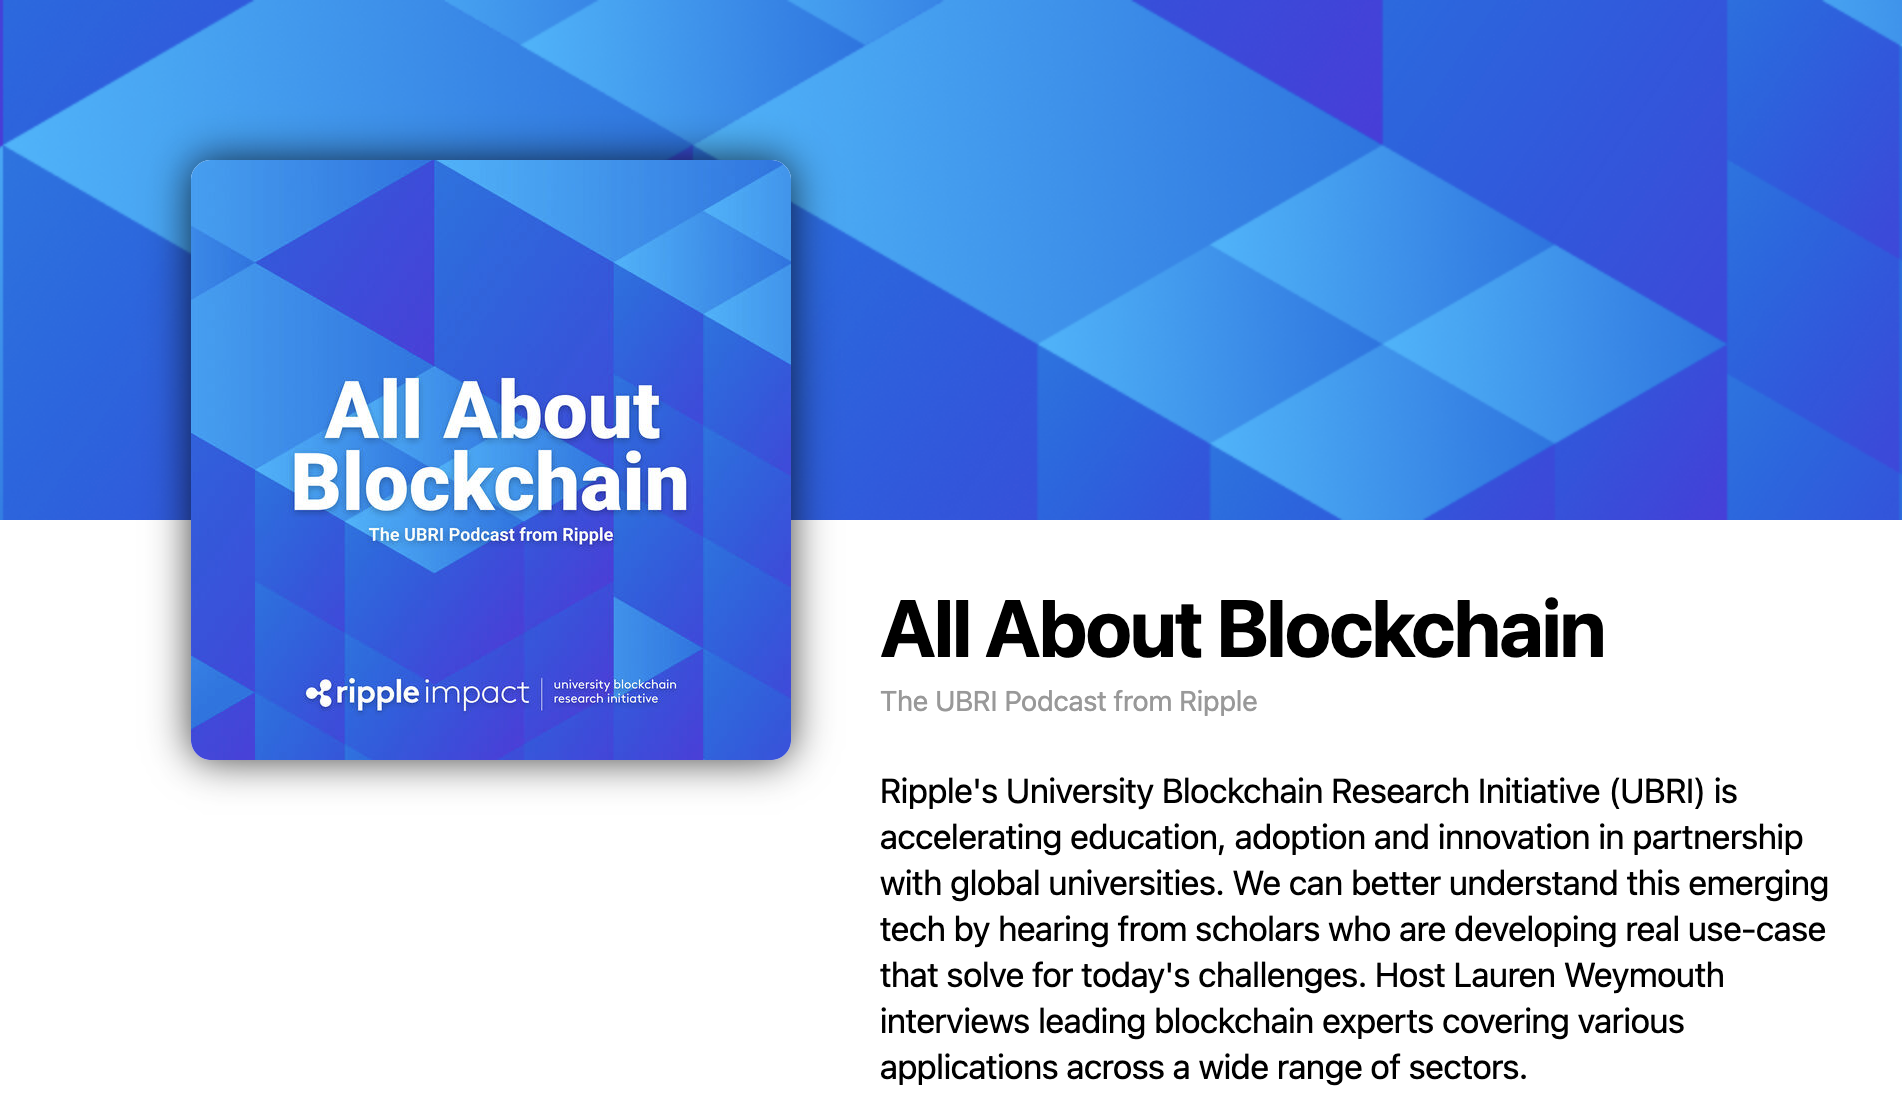 All About Blockchain